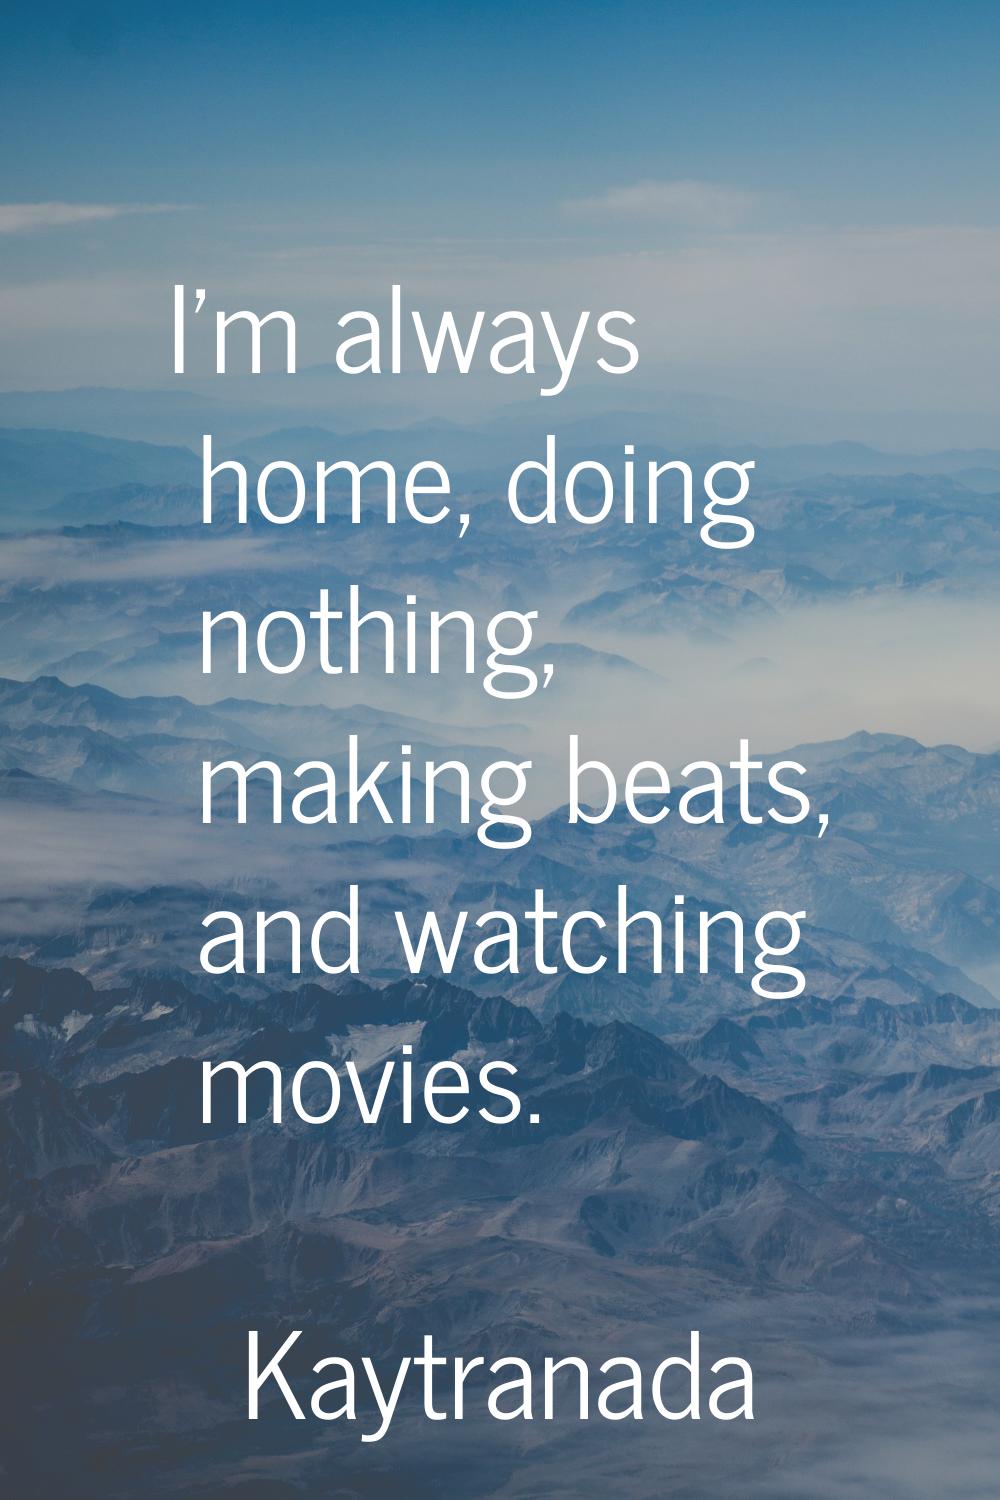 I'm always home, doing nothing, making beats, and watching movies.